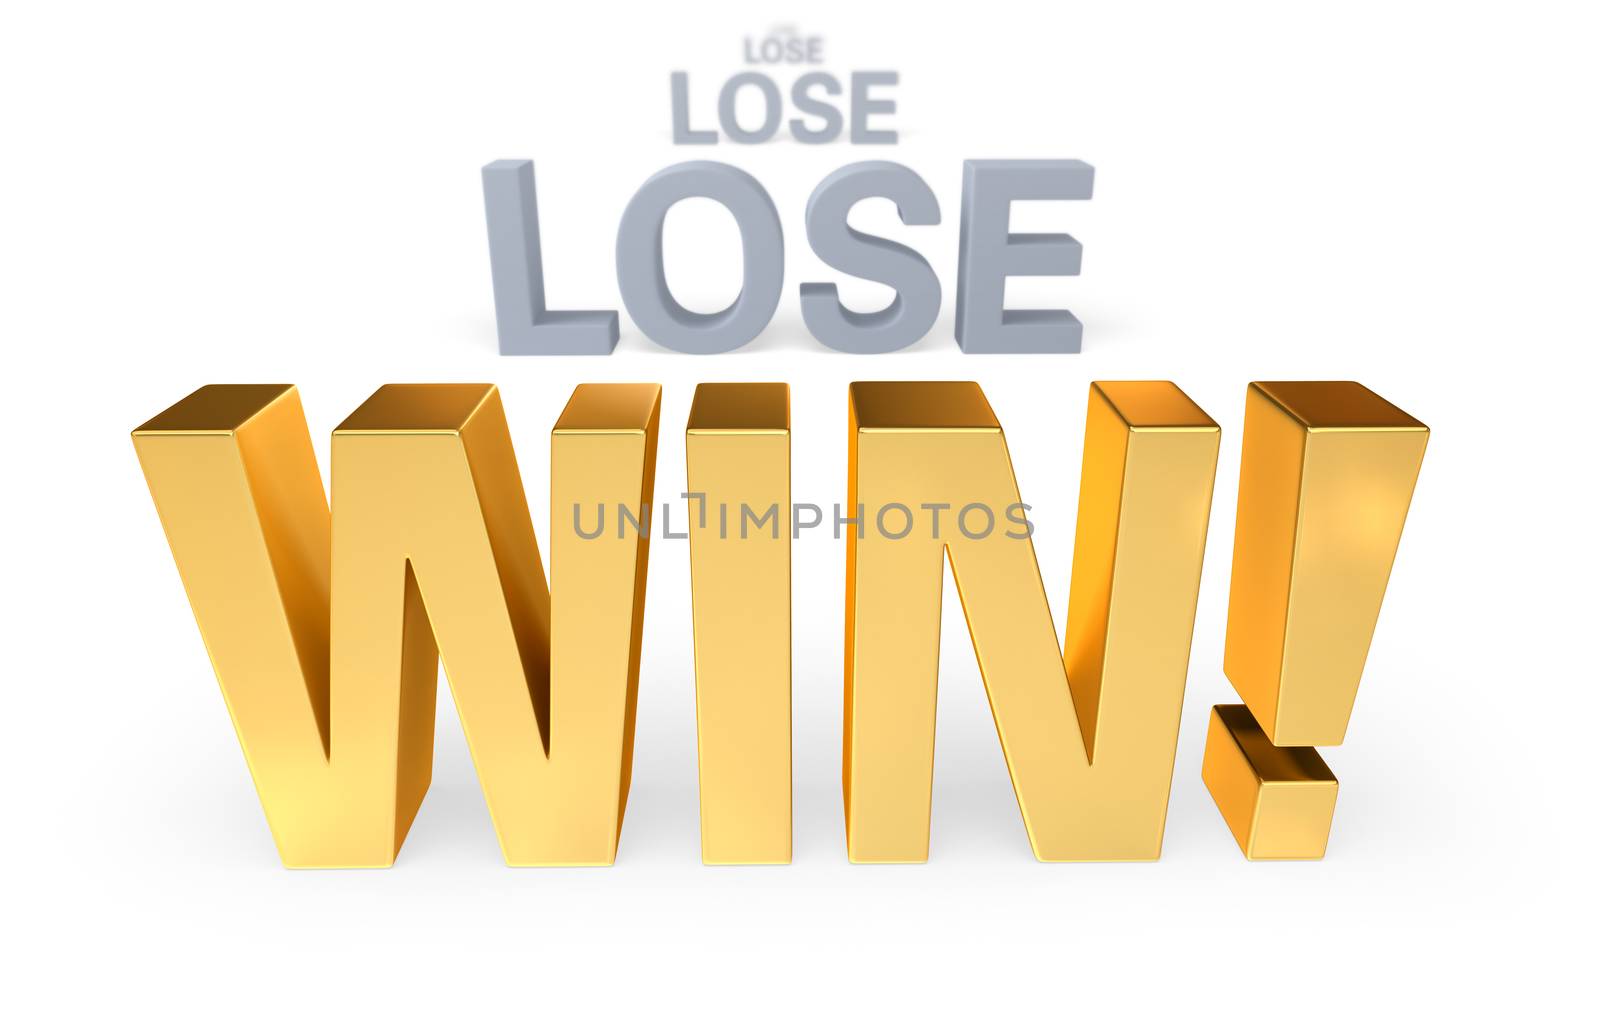 Sharp focus on triumphant, gold "WIN!" in front of a row of plain gray "LOSE"s blurring and receding into the distance. Isolated on white.